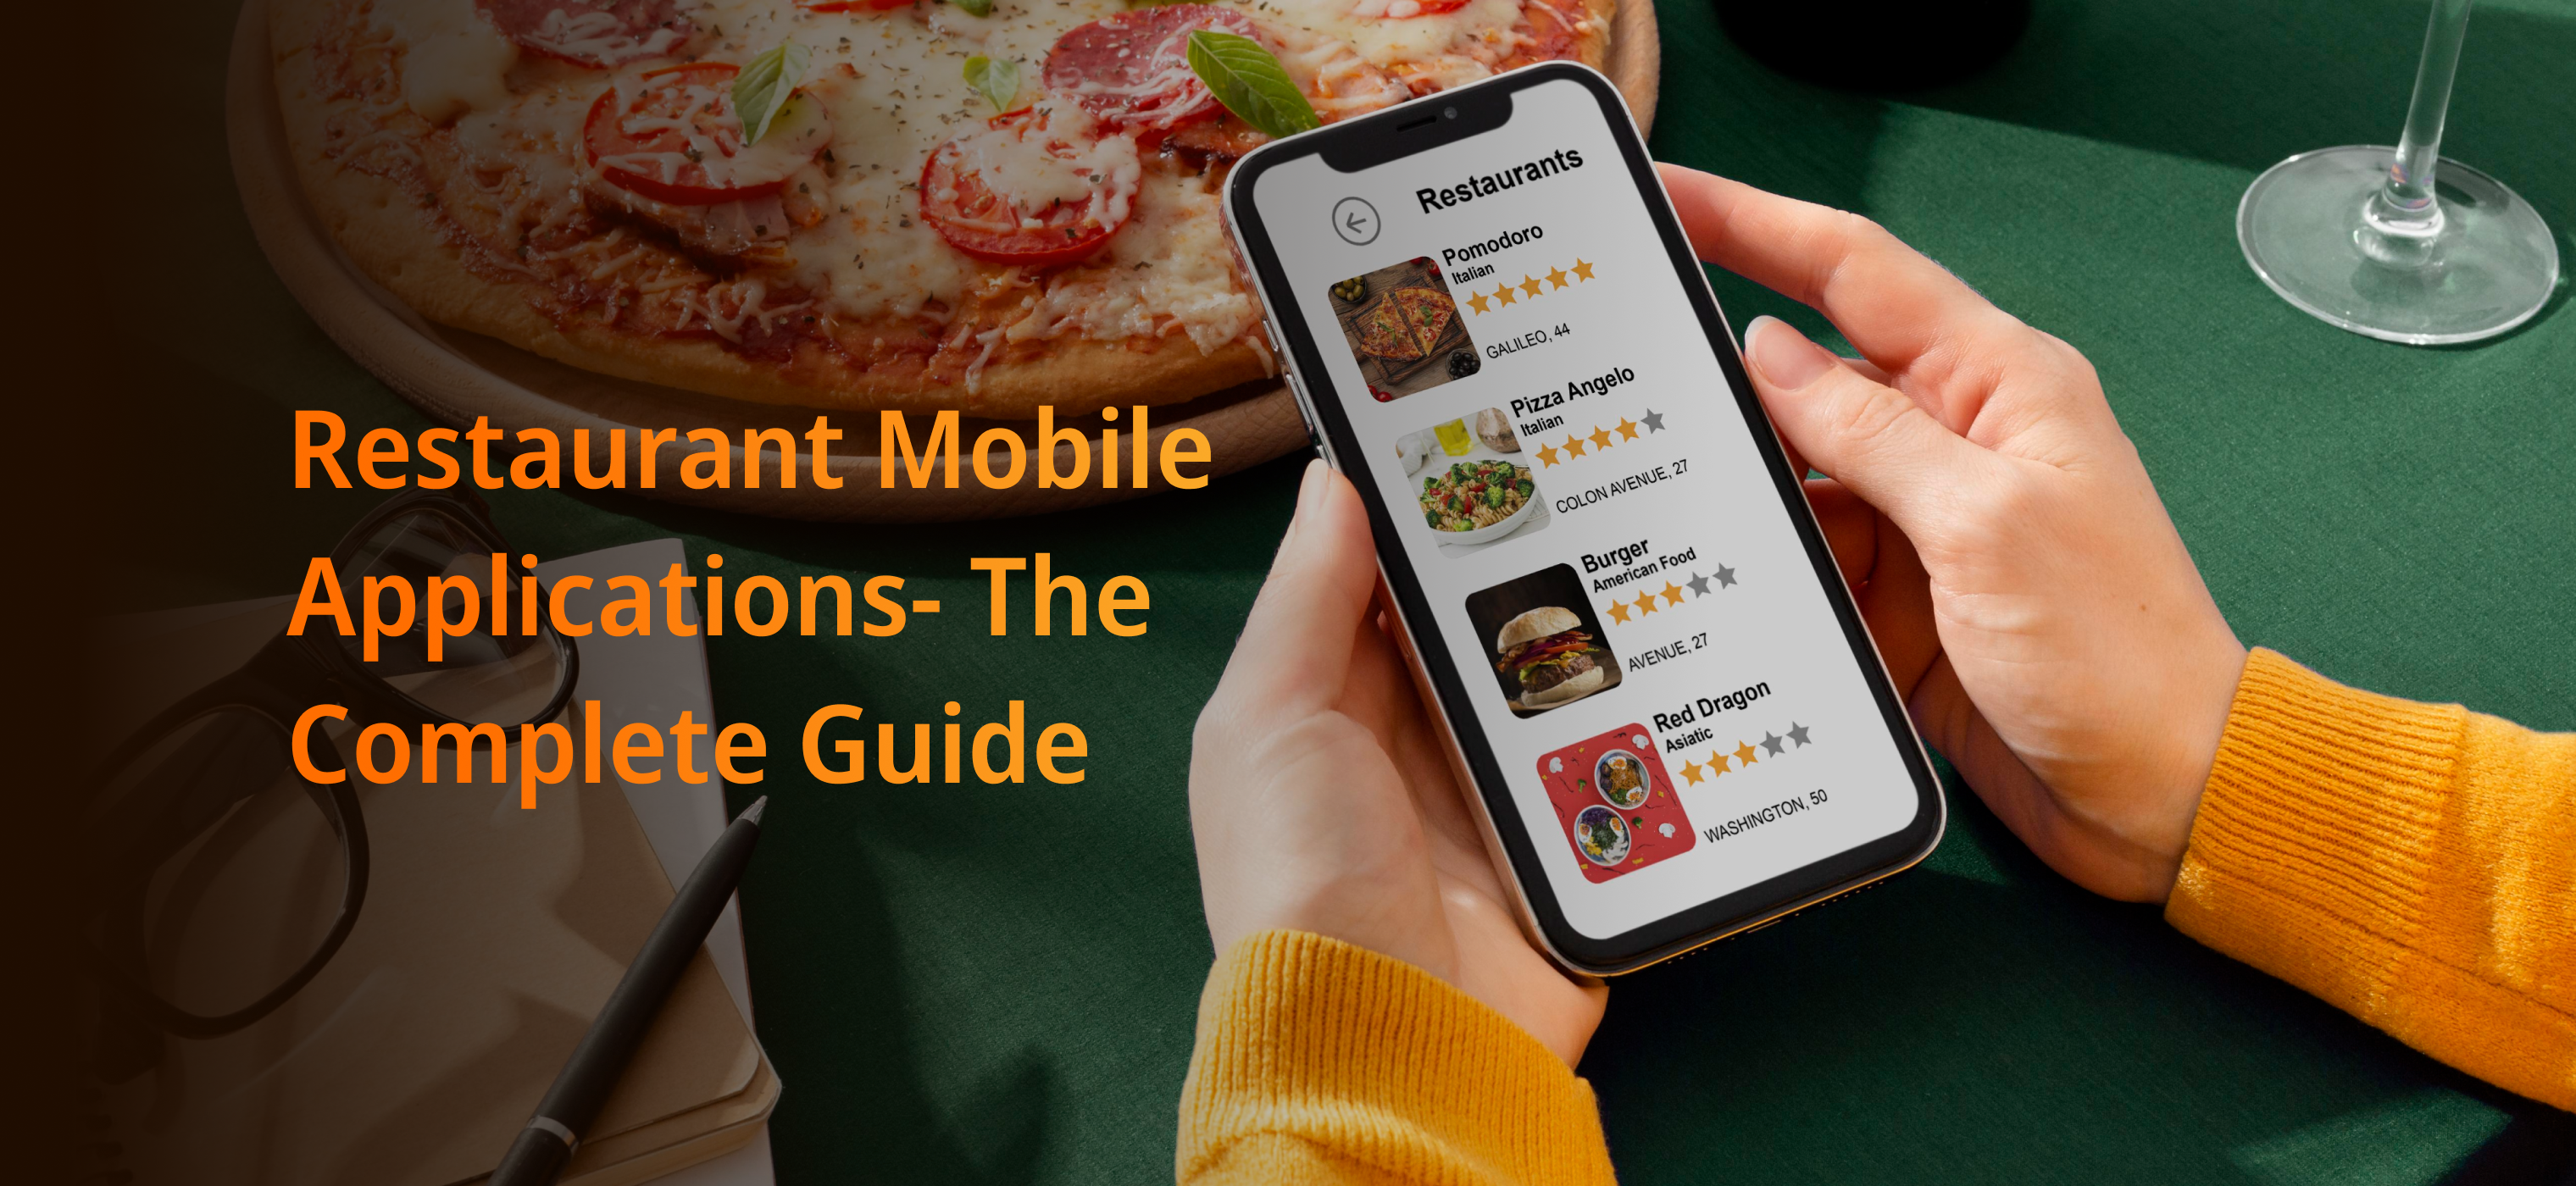 Restaurant Mobile Applications- The Complete Guide - Internet Soft